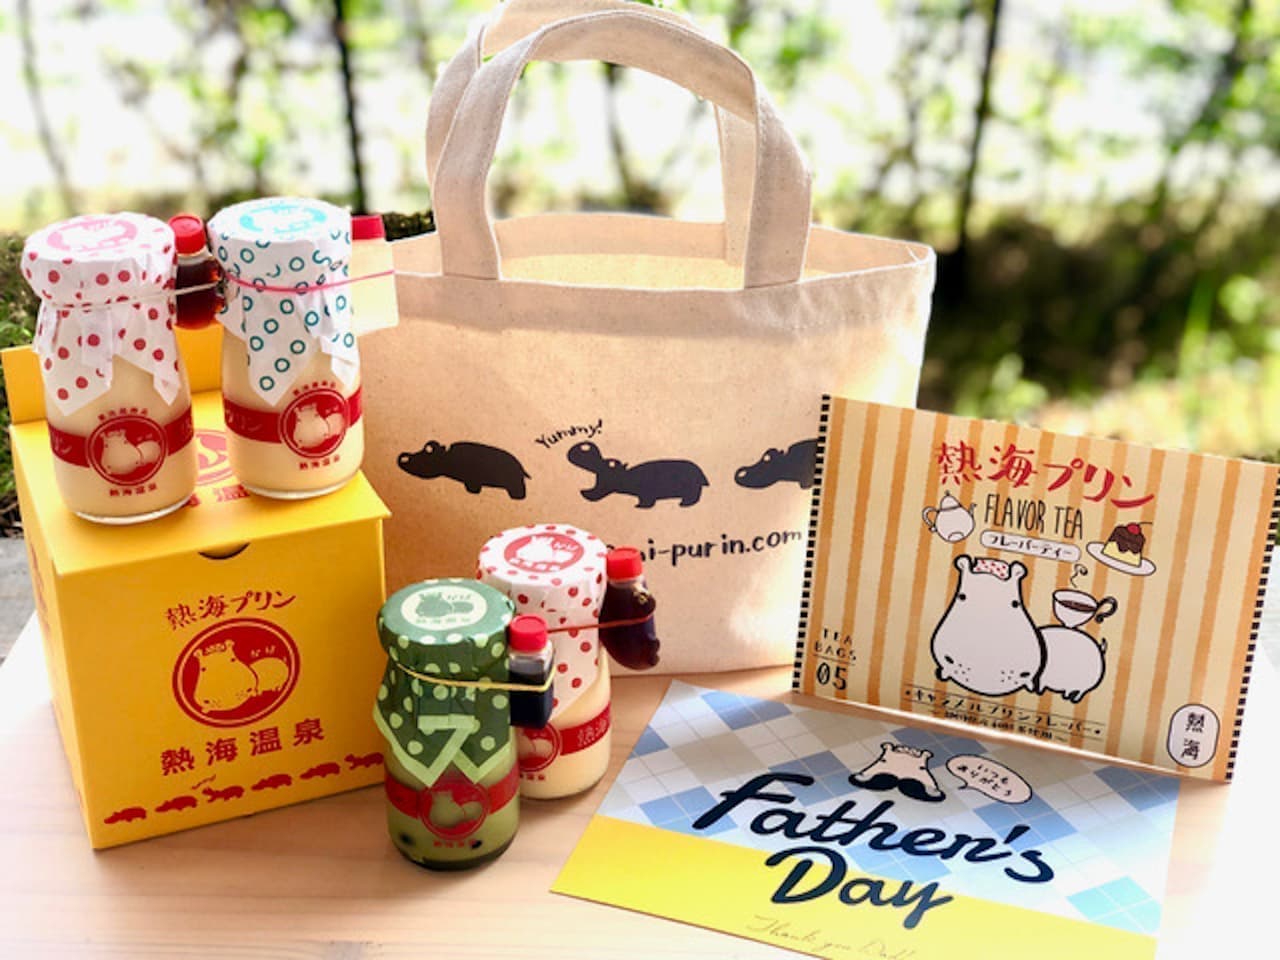 "Father's Day Gift Set" from Atami Pudding